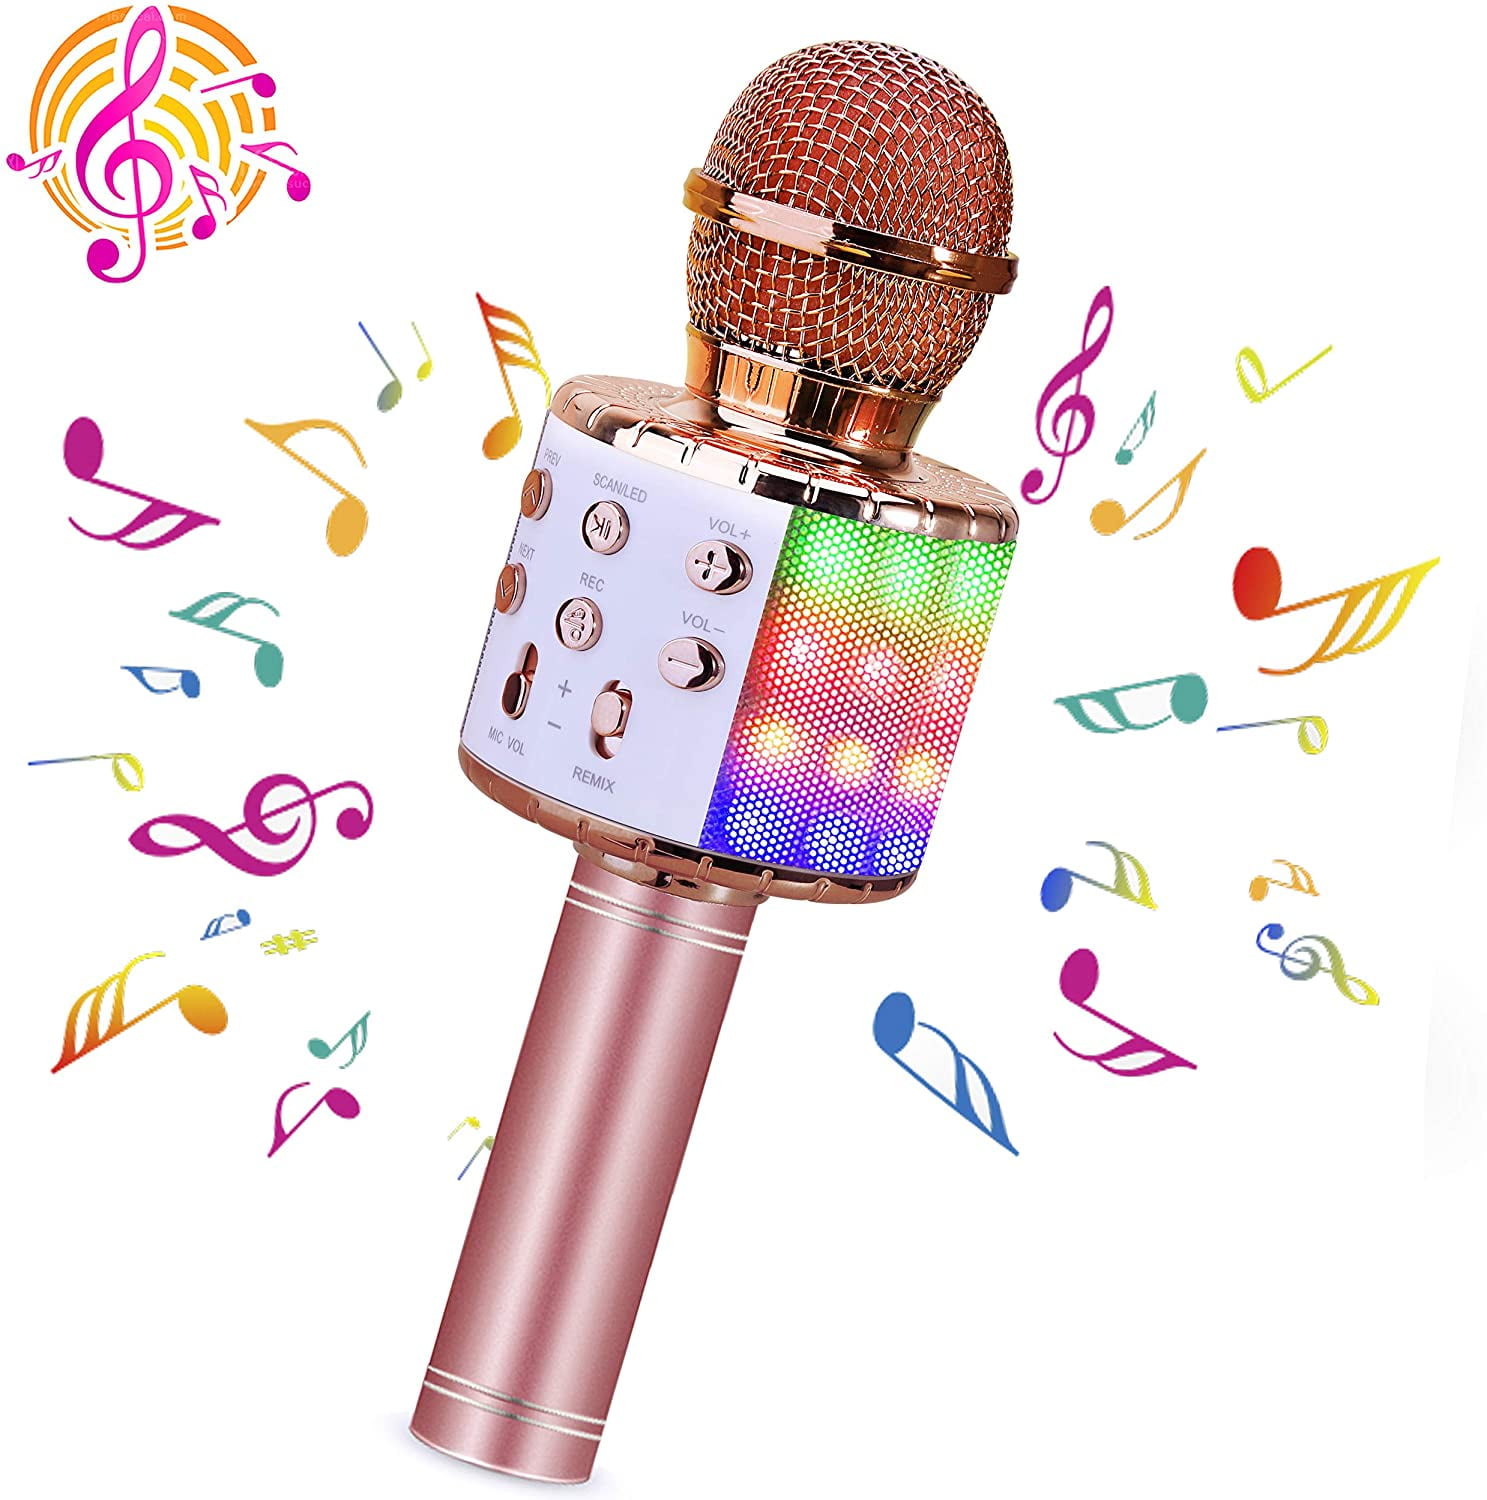 BlackYellow Karaoke Microphone for Kids with Bluetooth Wireless LED Lights,AlwaysGO 3-in-1 Portable Handheld Karaoke Mic Birthday Home Party Great Gifts Toys for Girls Boys All Smartphone 